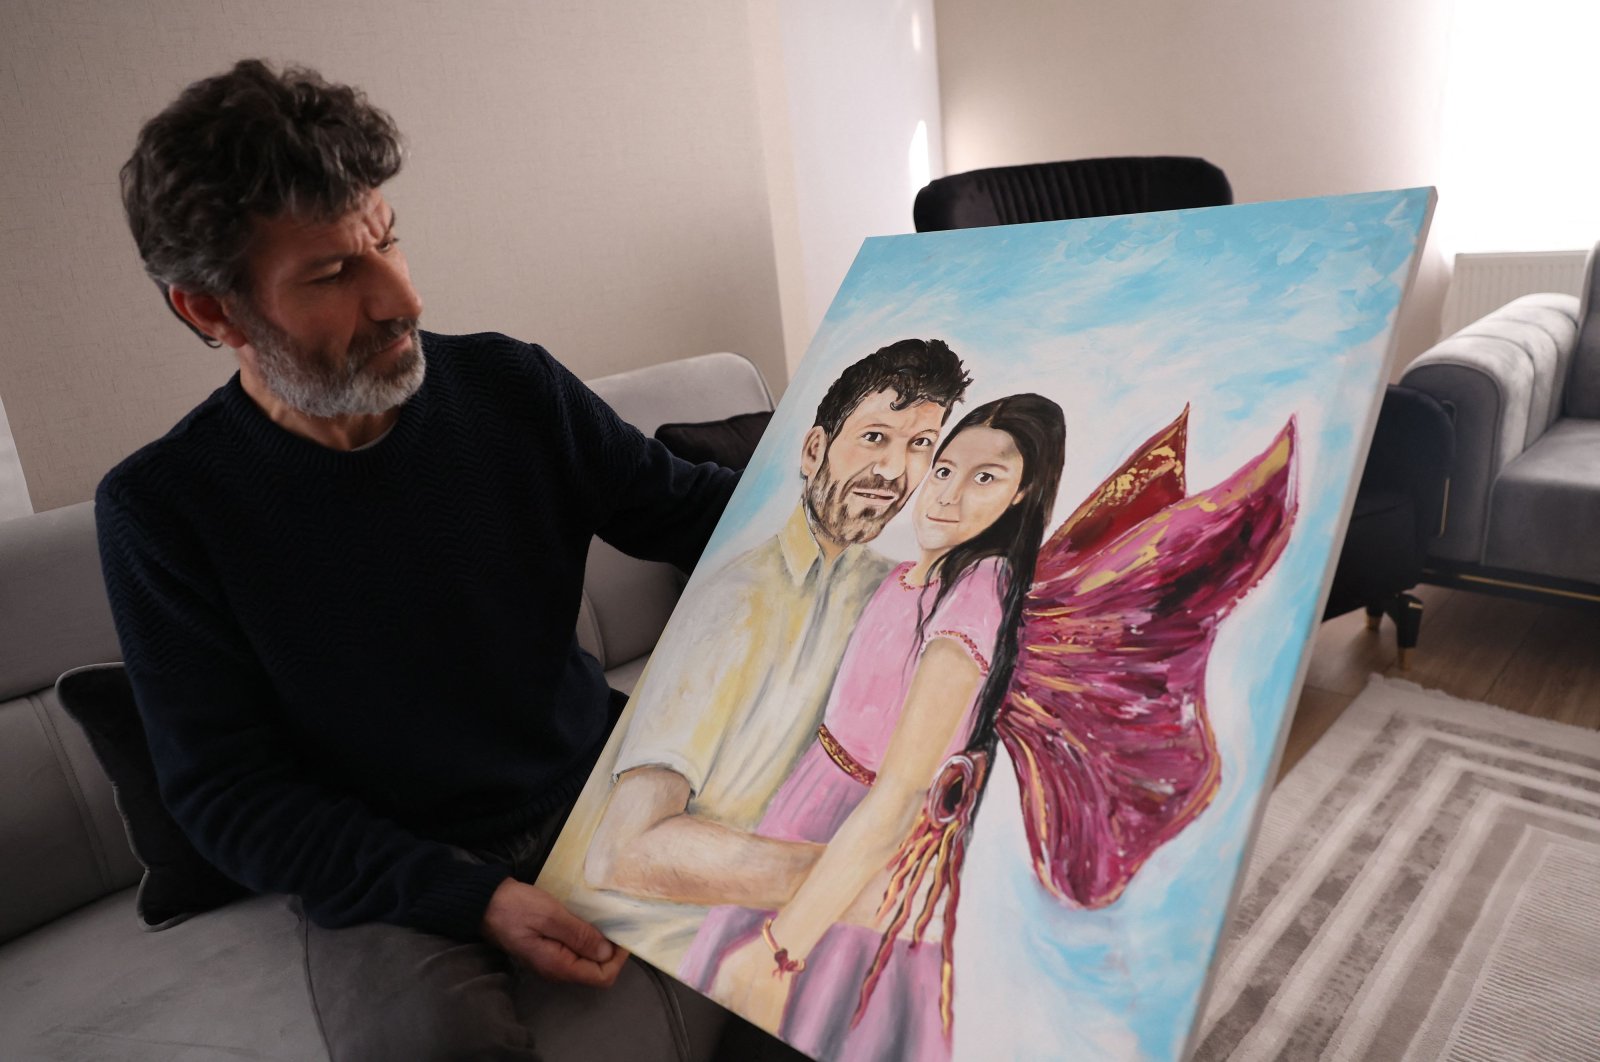 Turkish father Mesut Hançer, poses and holds a painting representing him and his daughter Irmak in his appartment as his family tries to rebuild, after losing their 15-years old daughter in the earthquake that devastated the southeastern region of Türkiye, Ankara, Türkiye, Feb. 25, 2023. (AFP Photo)